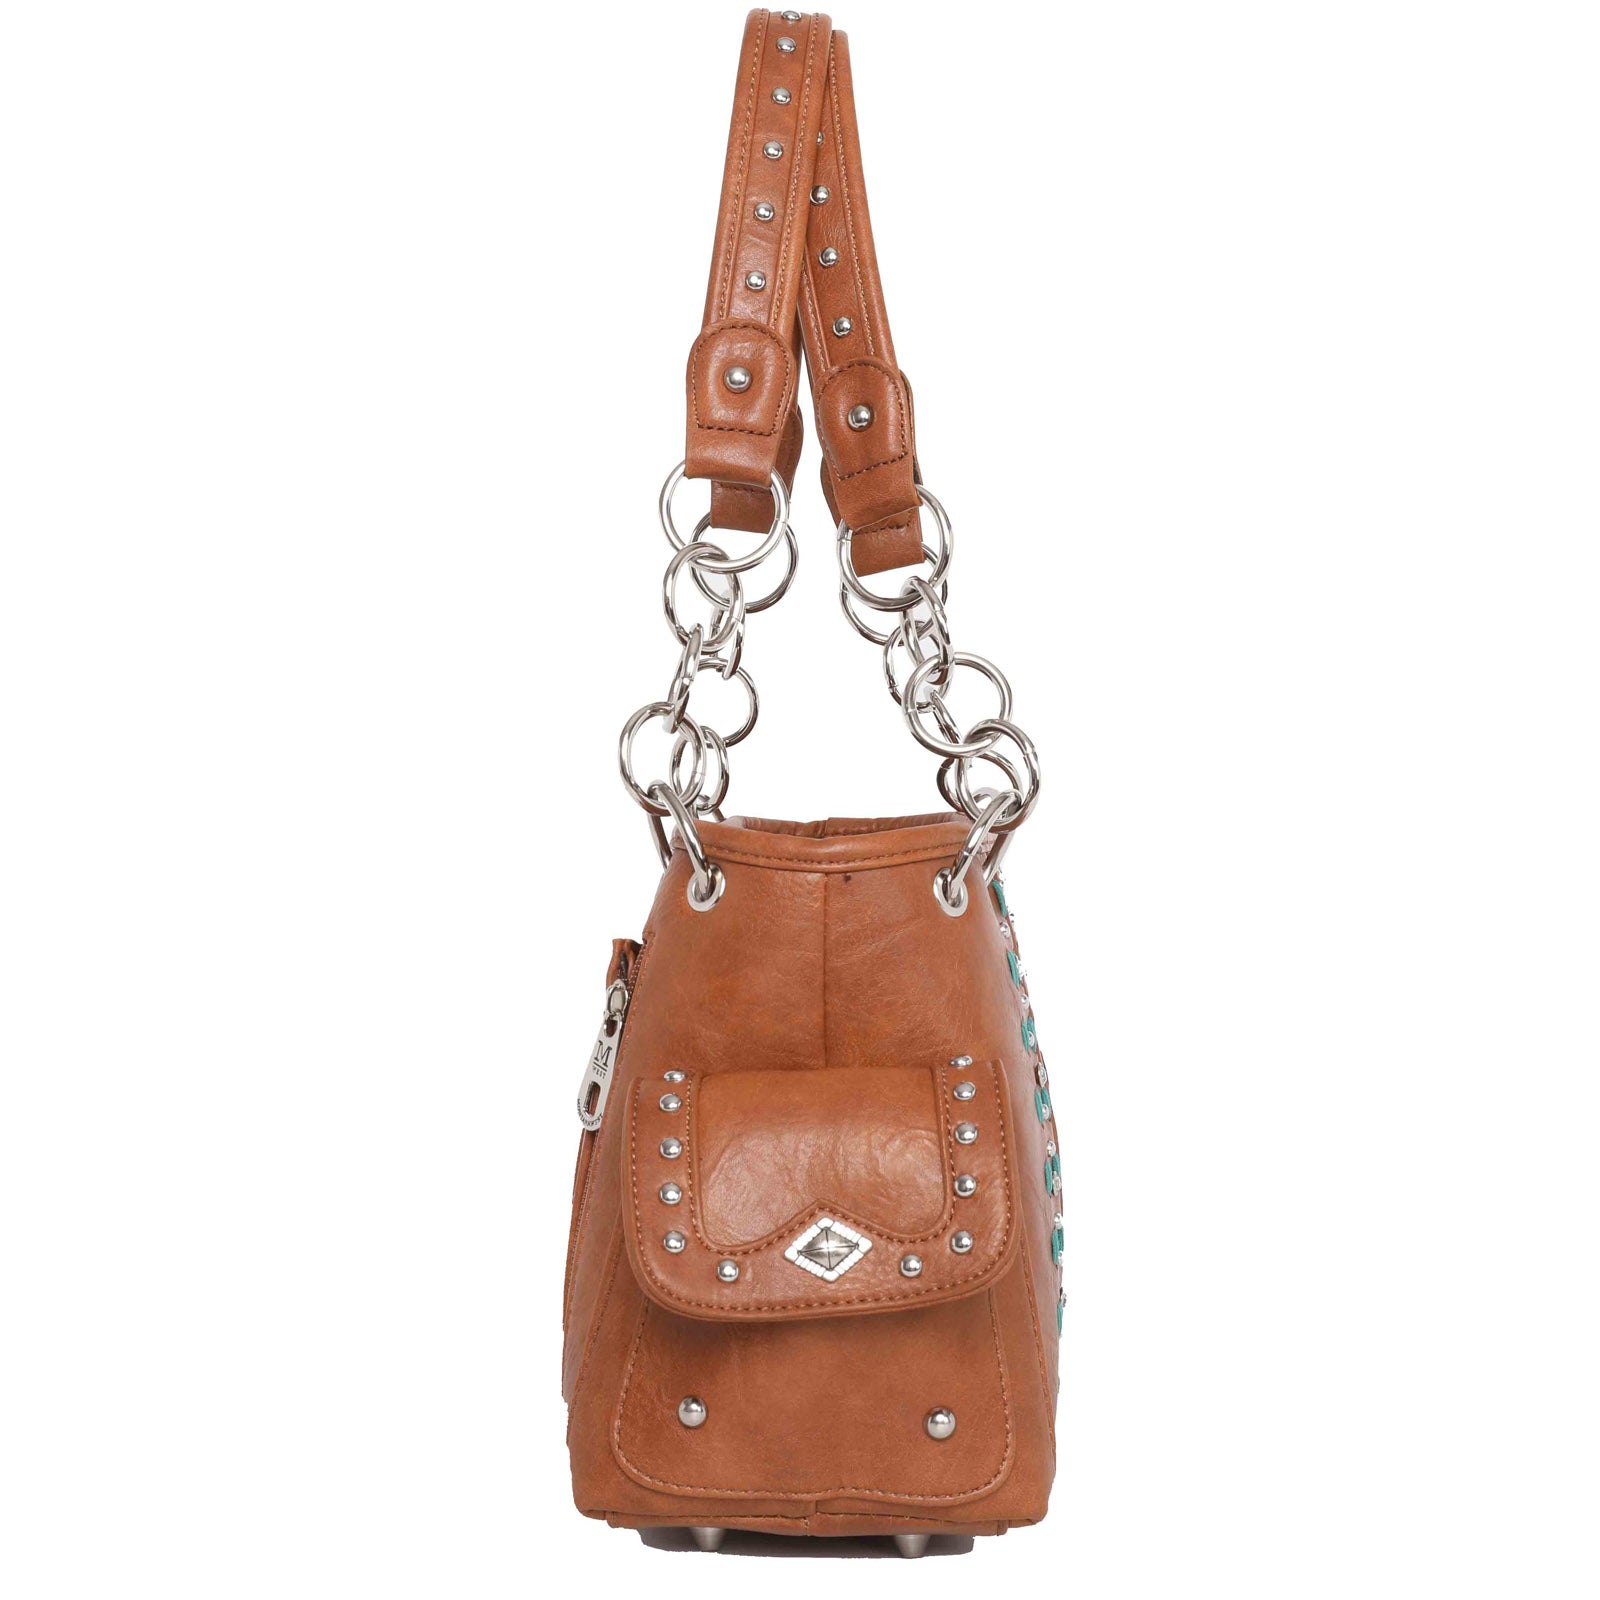 Montana West Cut-Out Collection Concealed Carry Satchel - Cowgirl Wear